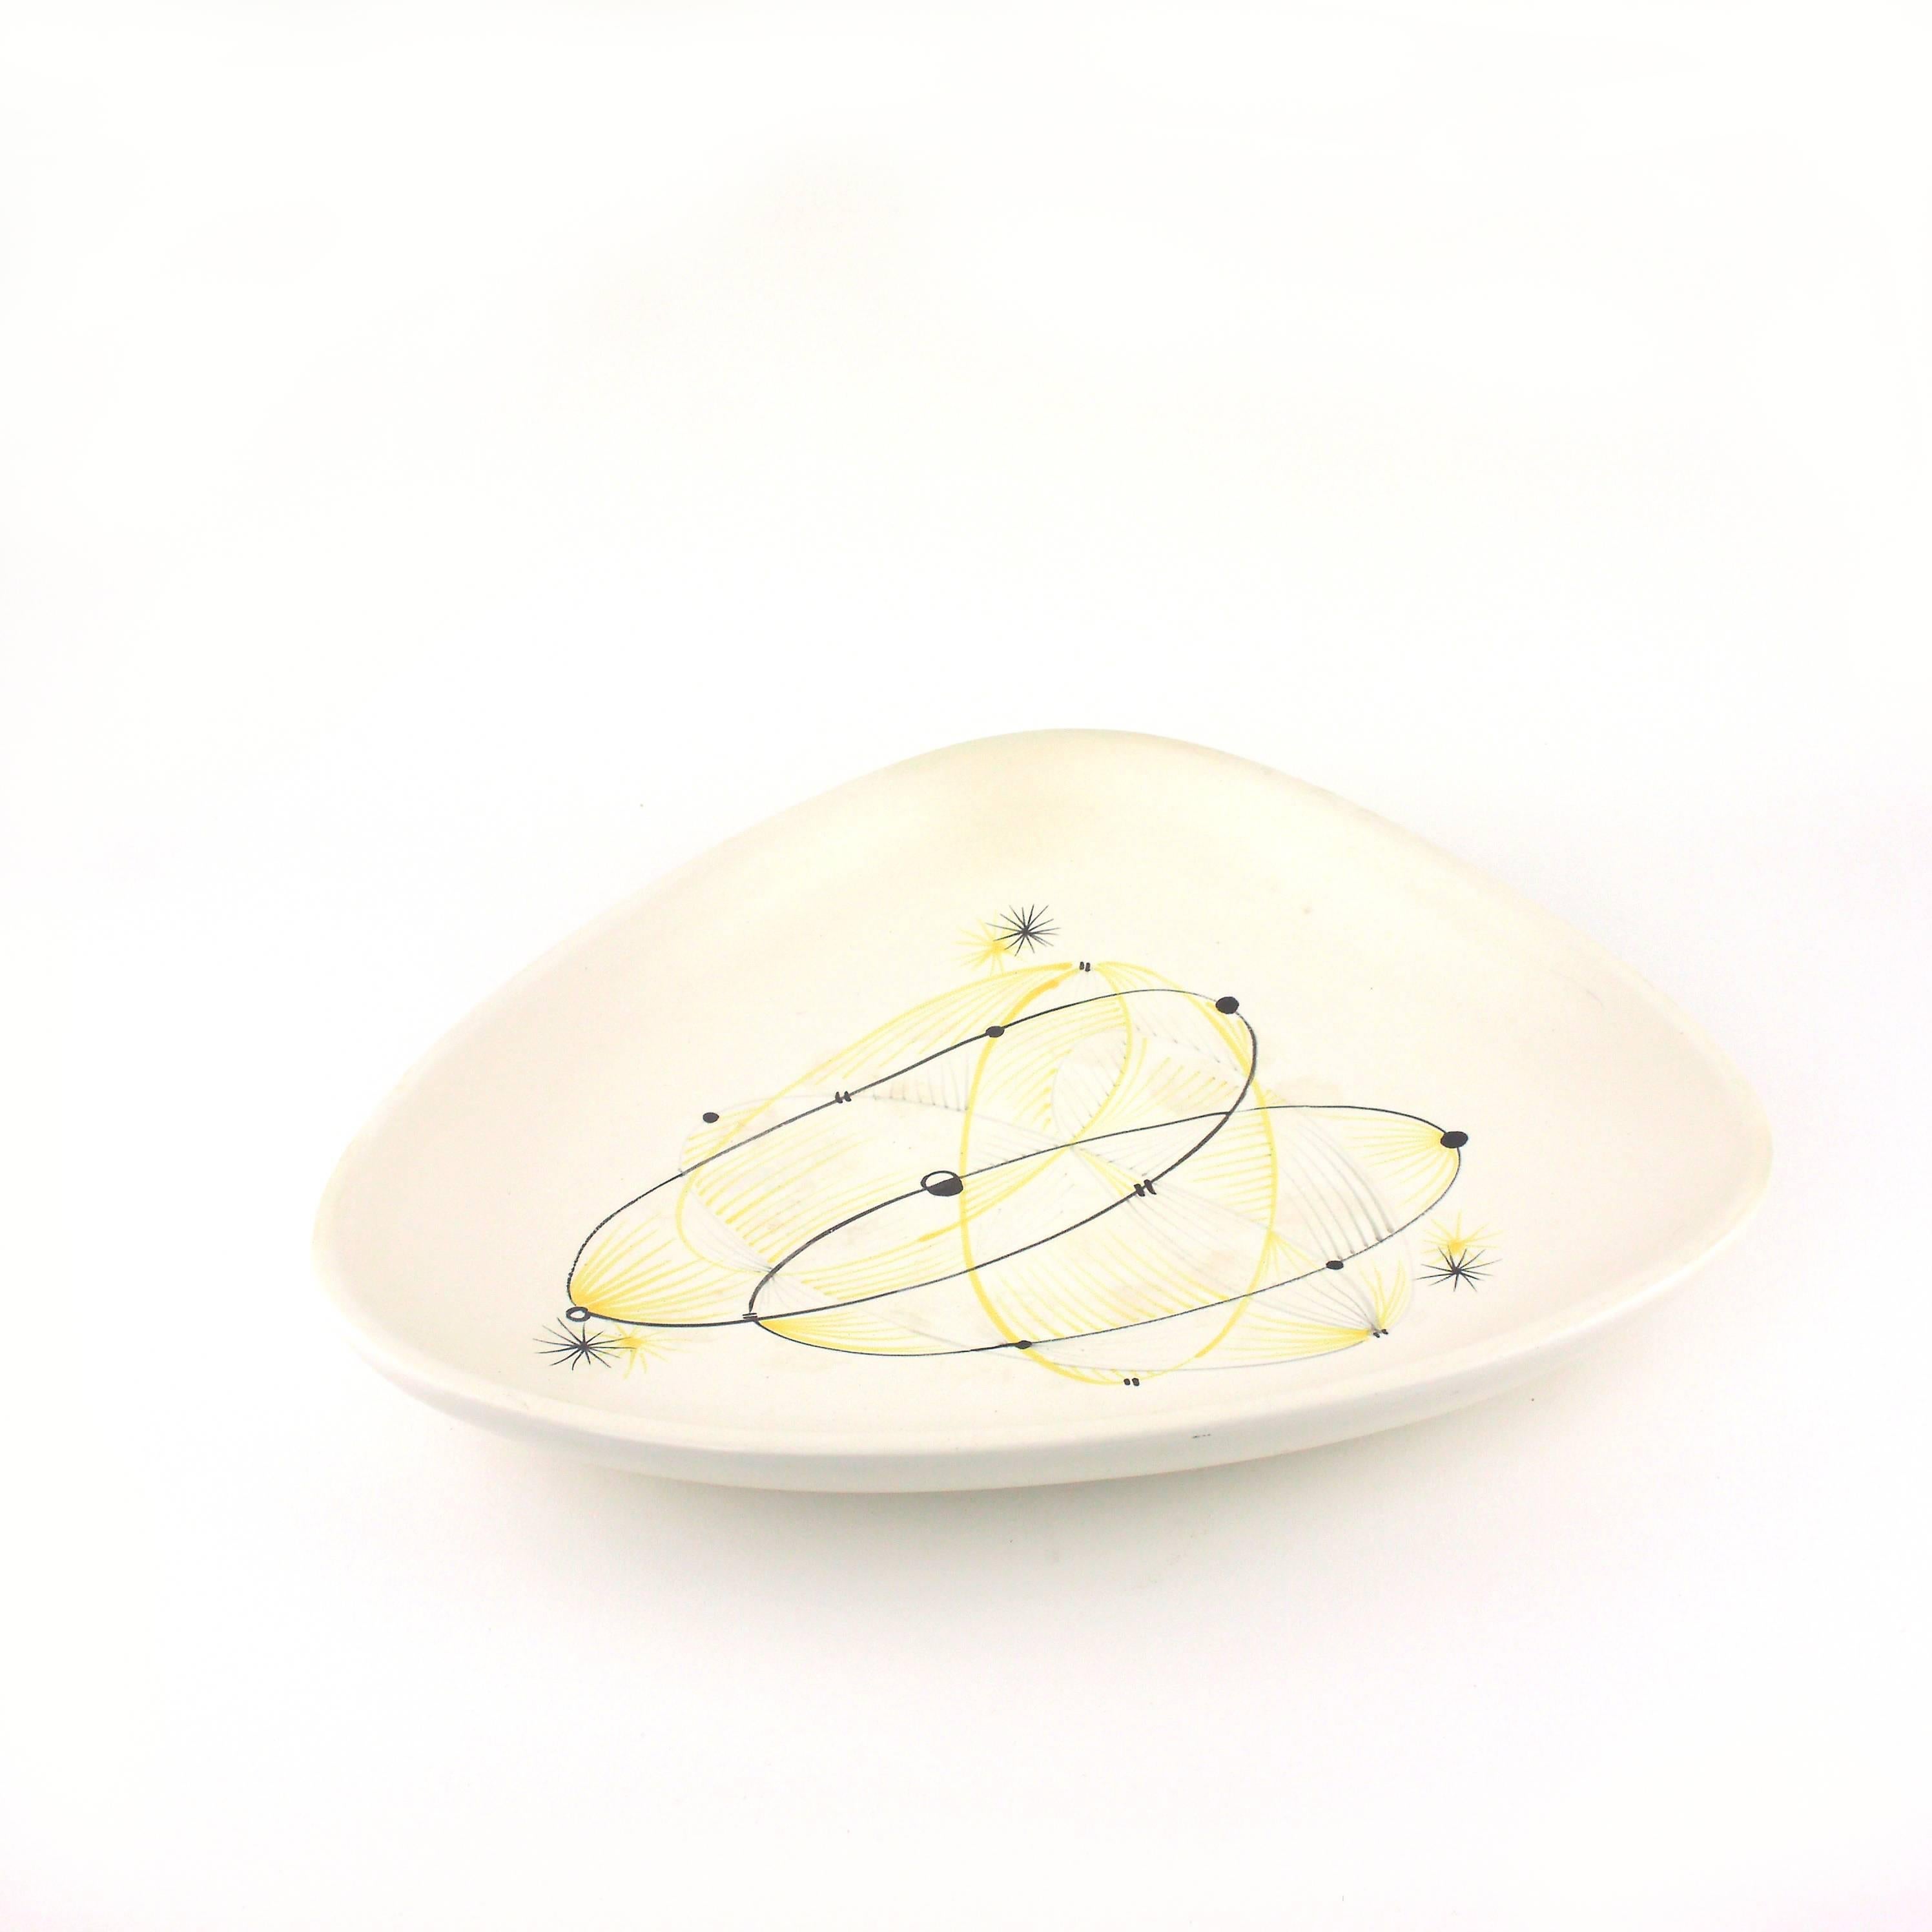 Big white ceramic platter by French ceramist André Baud in Vallauris. Stars & orbits decoration.